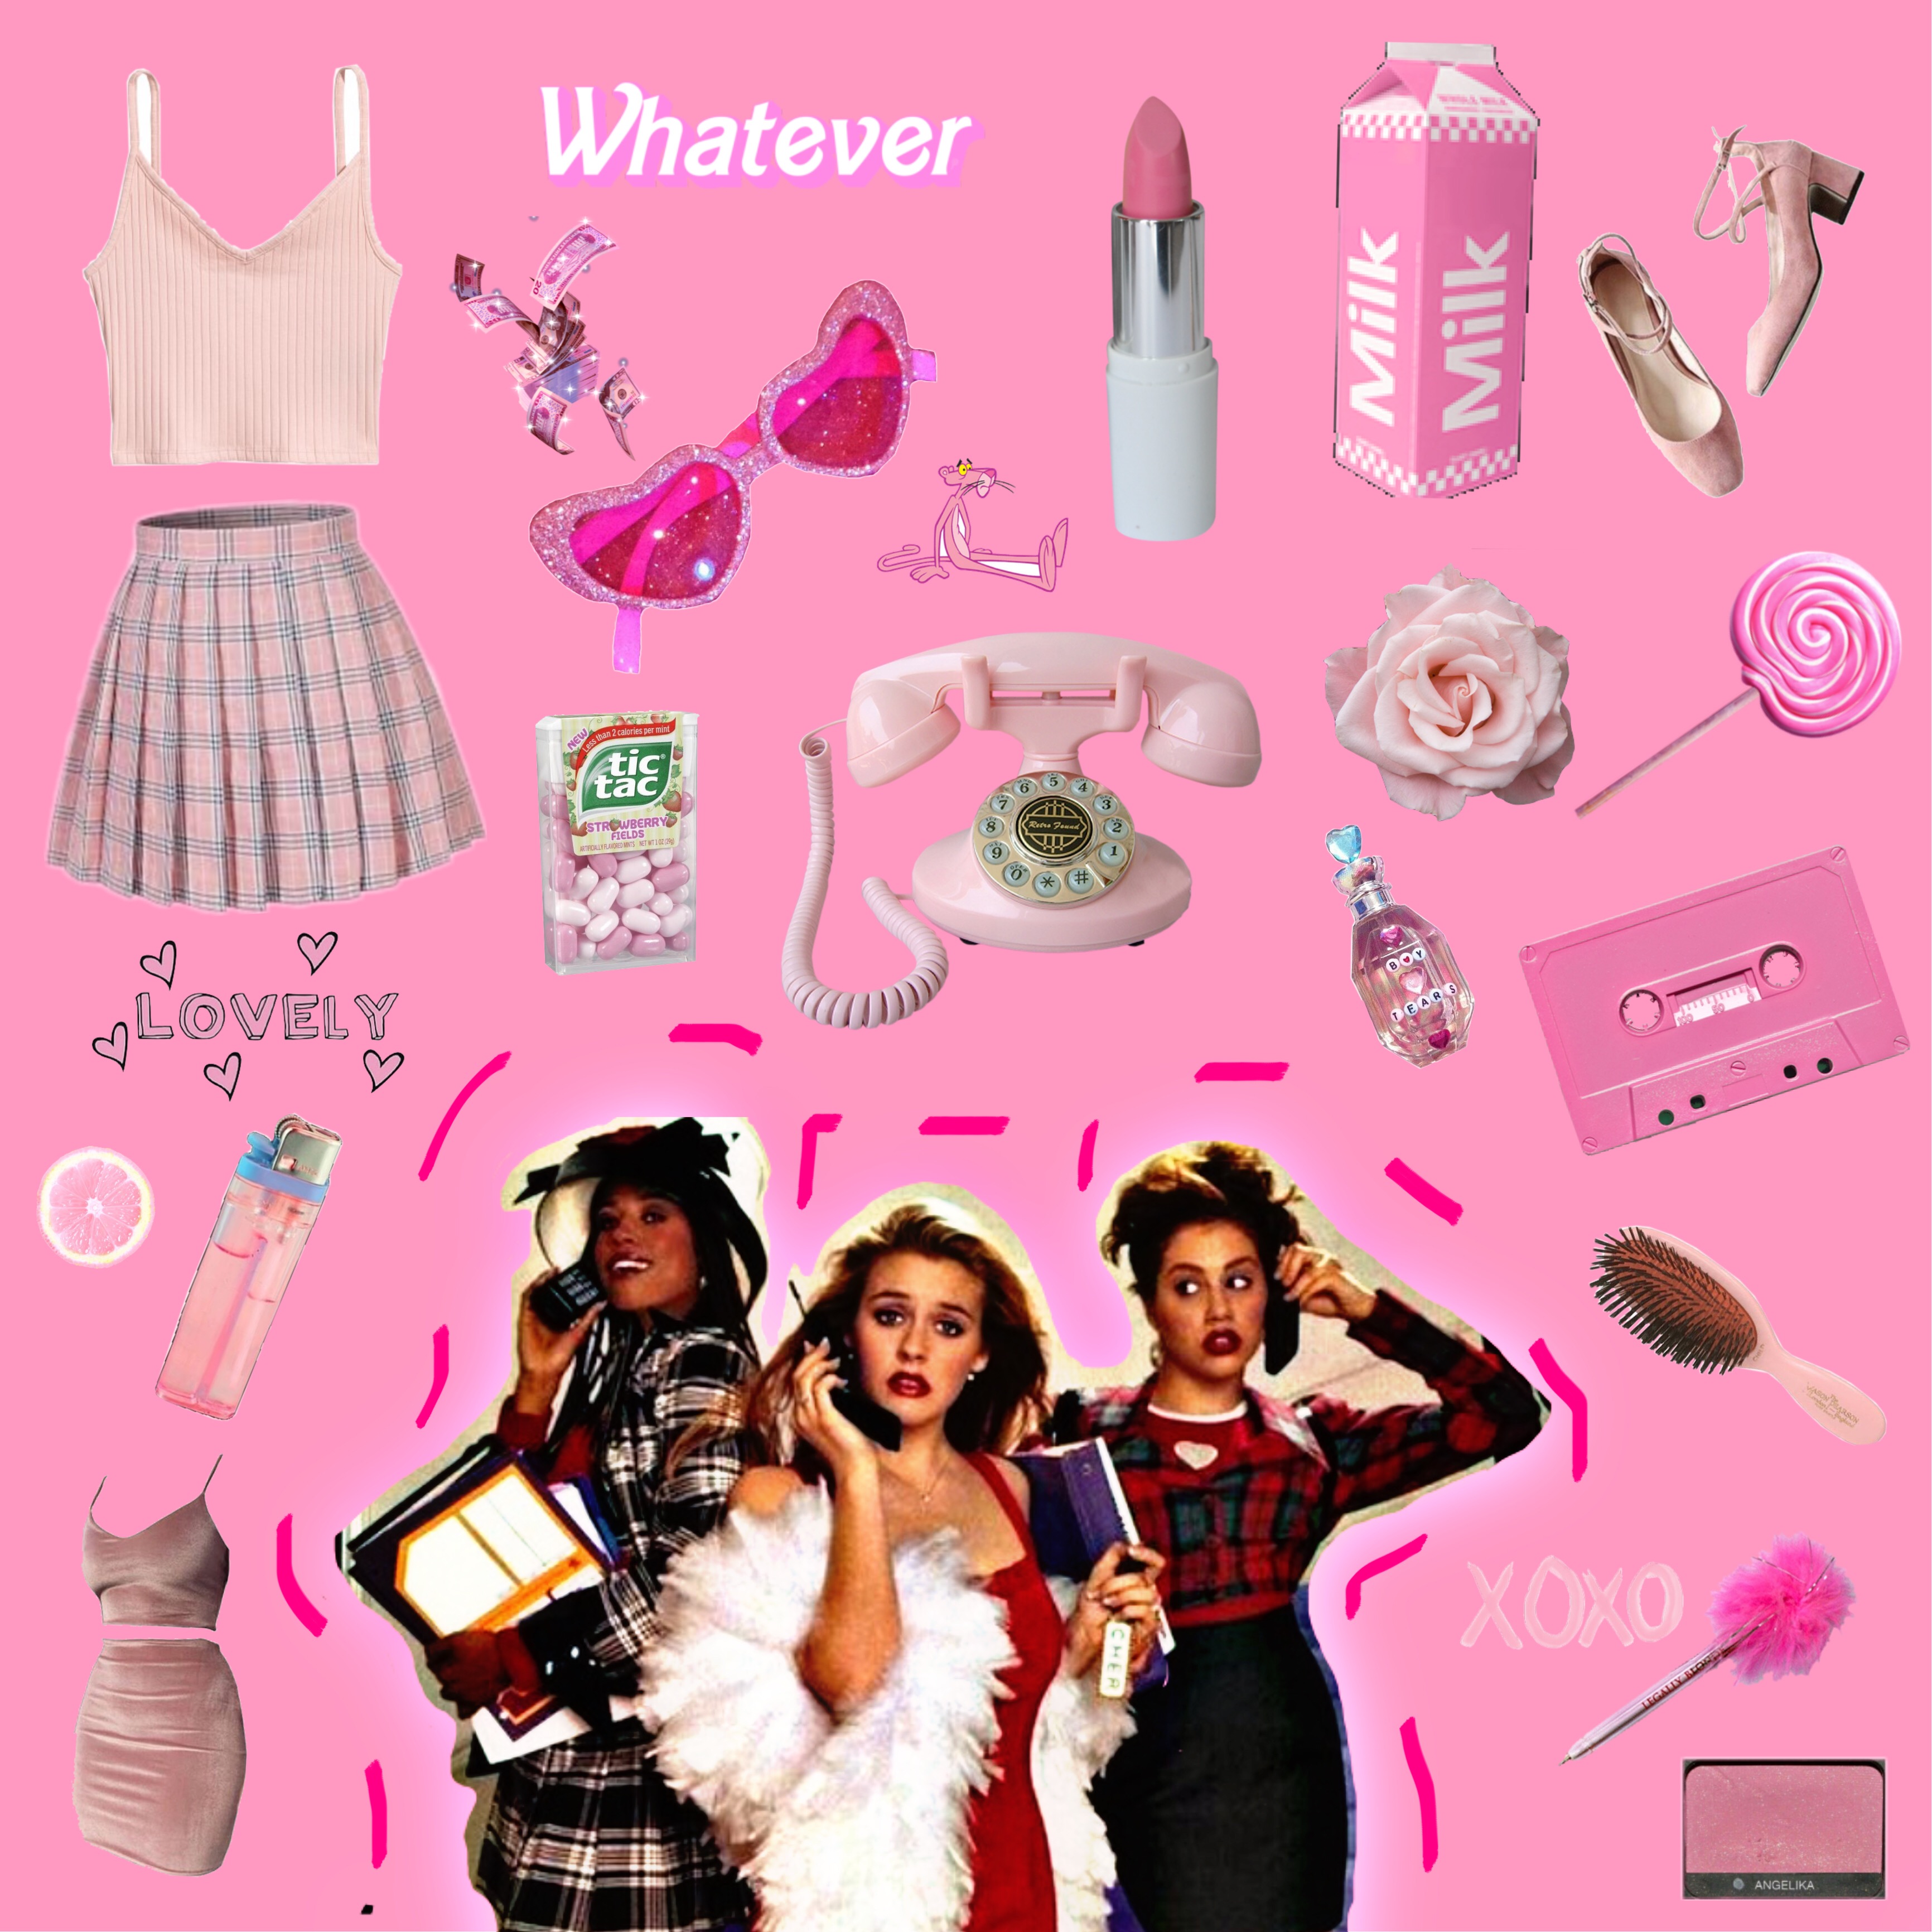 clueless freetoedit aesthetic pink image by @unknown-idoto